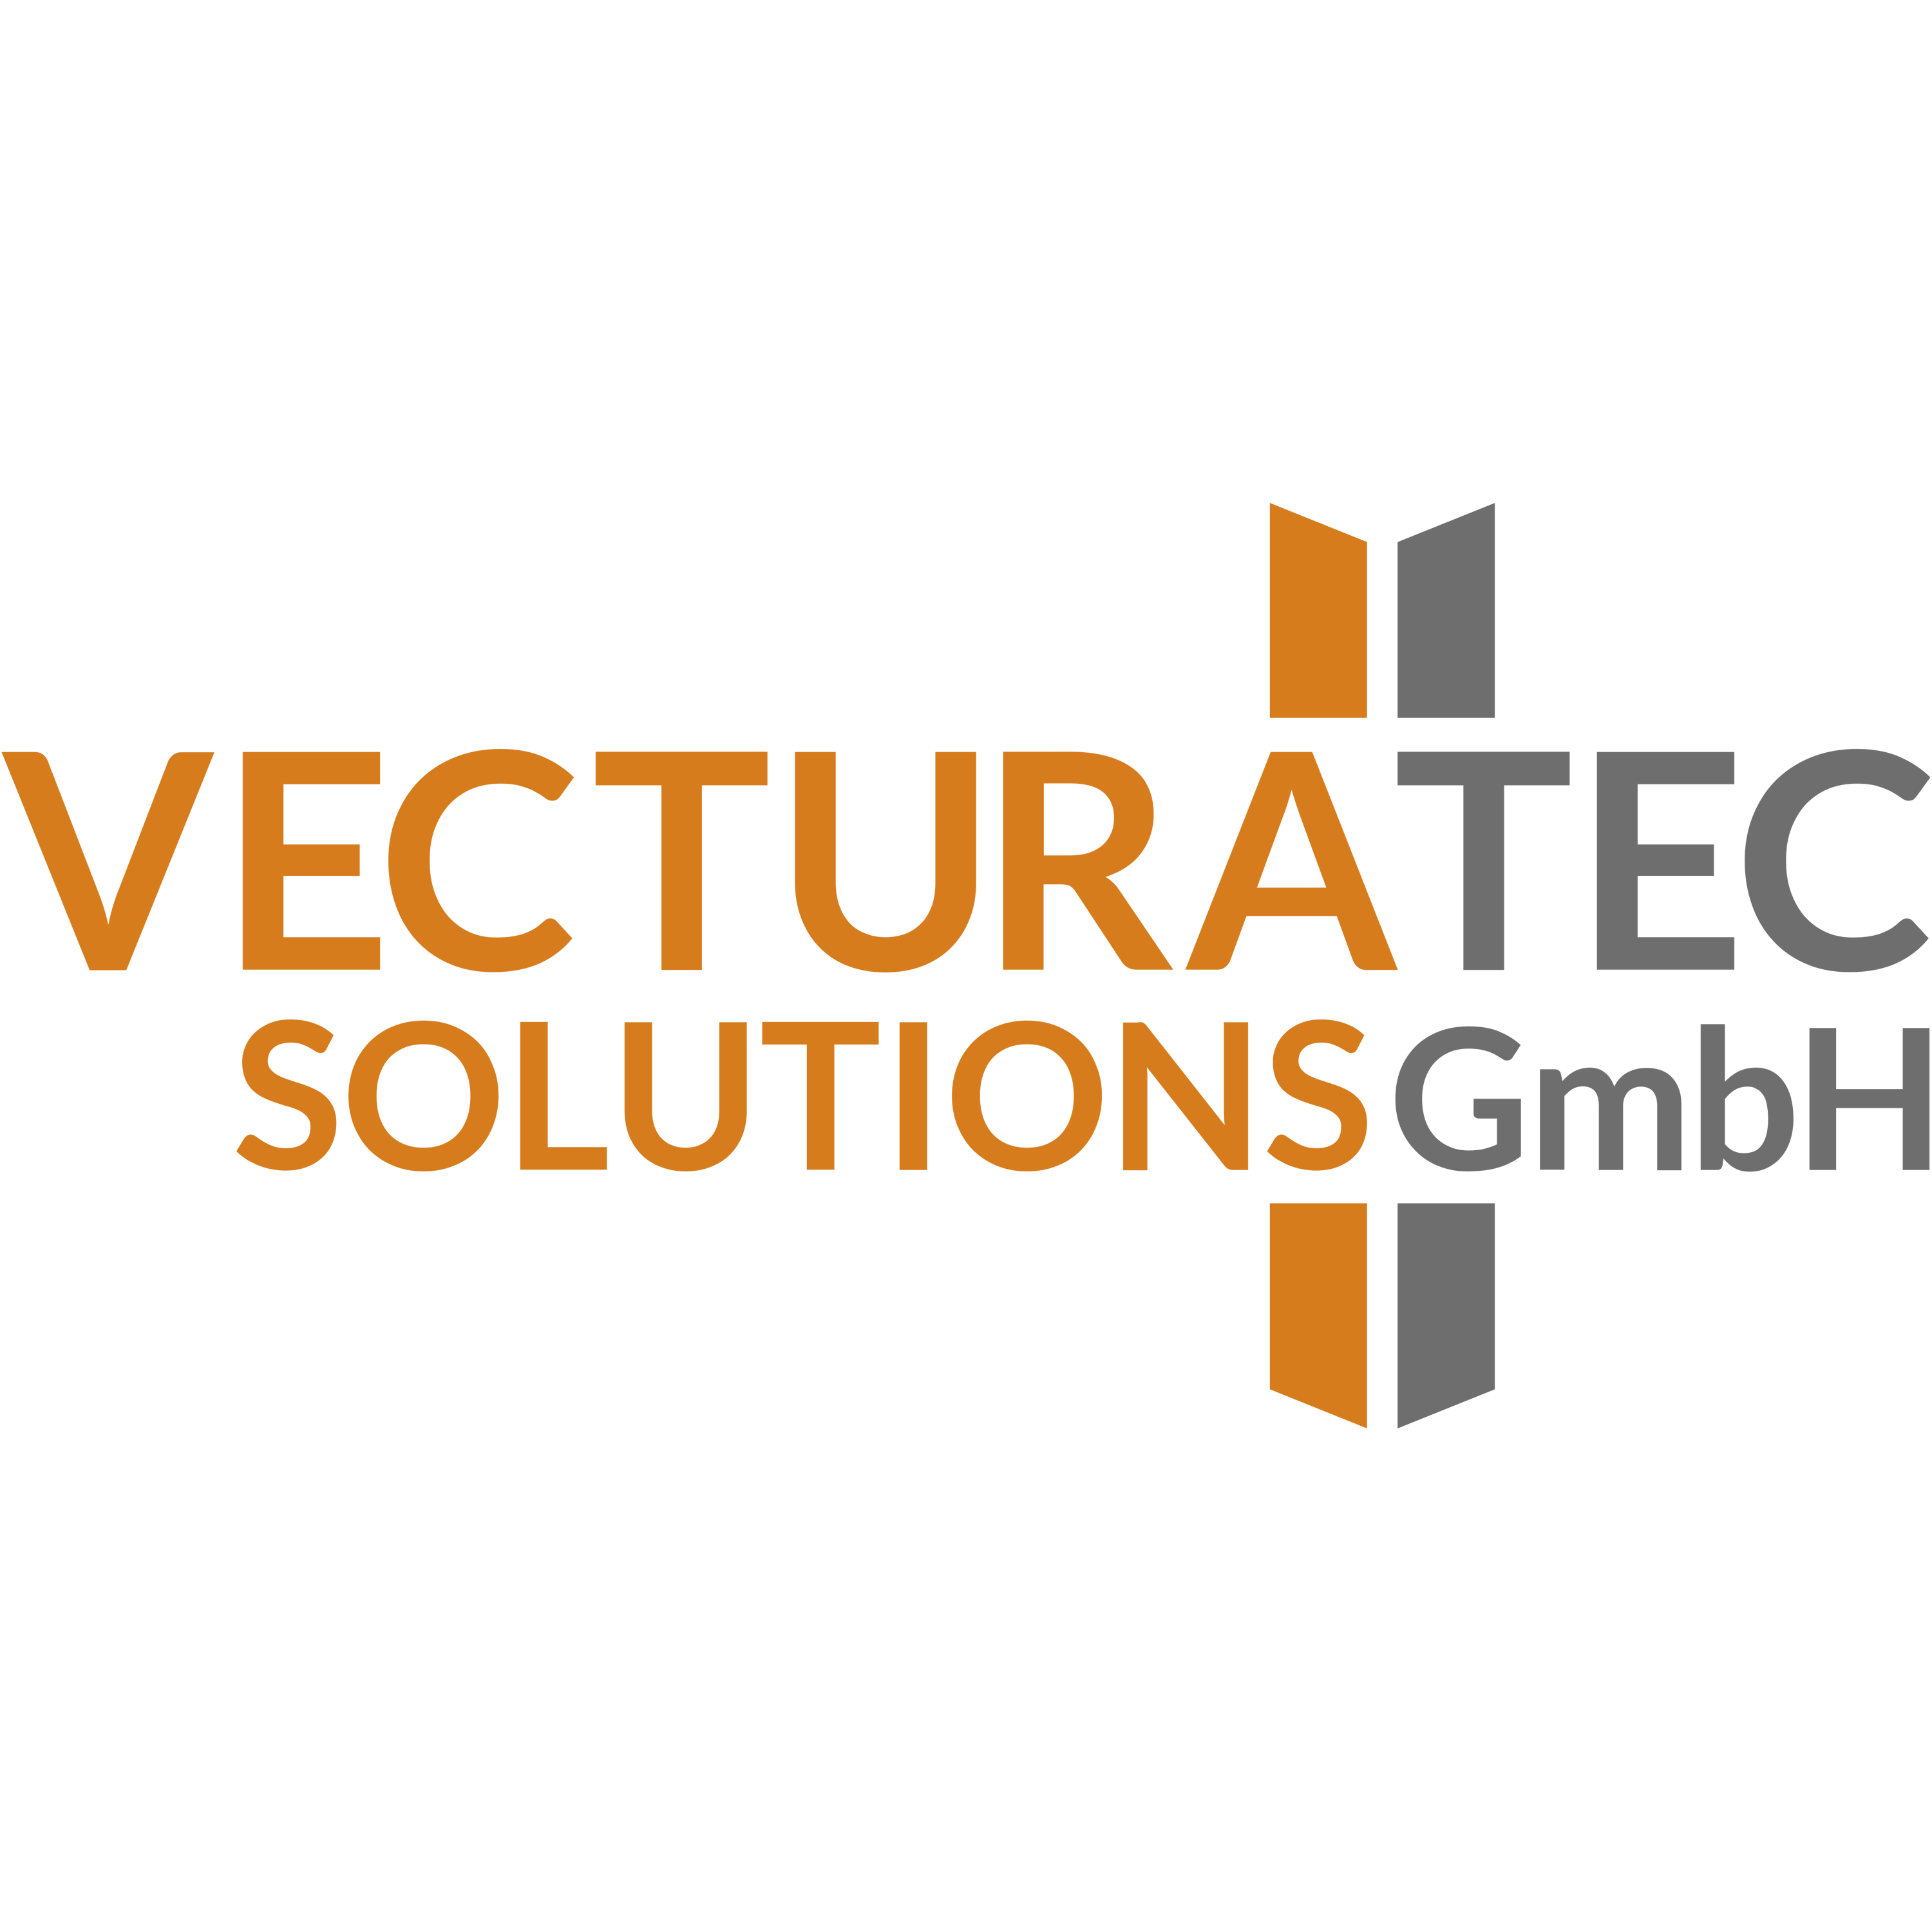 Vecturatech Solutions Logo Transparent Image